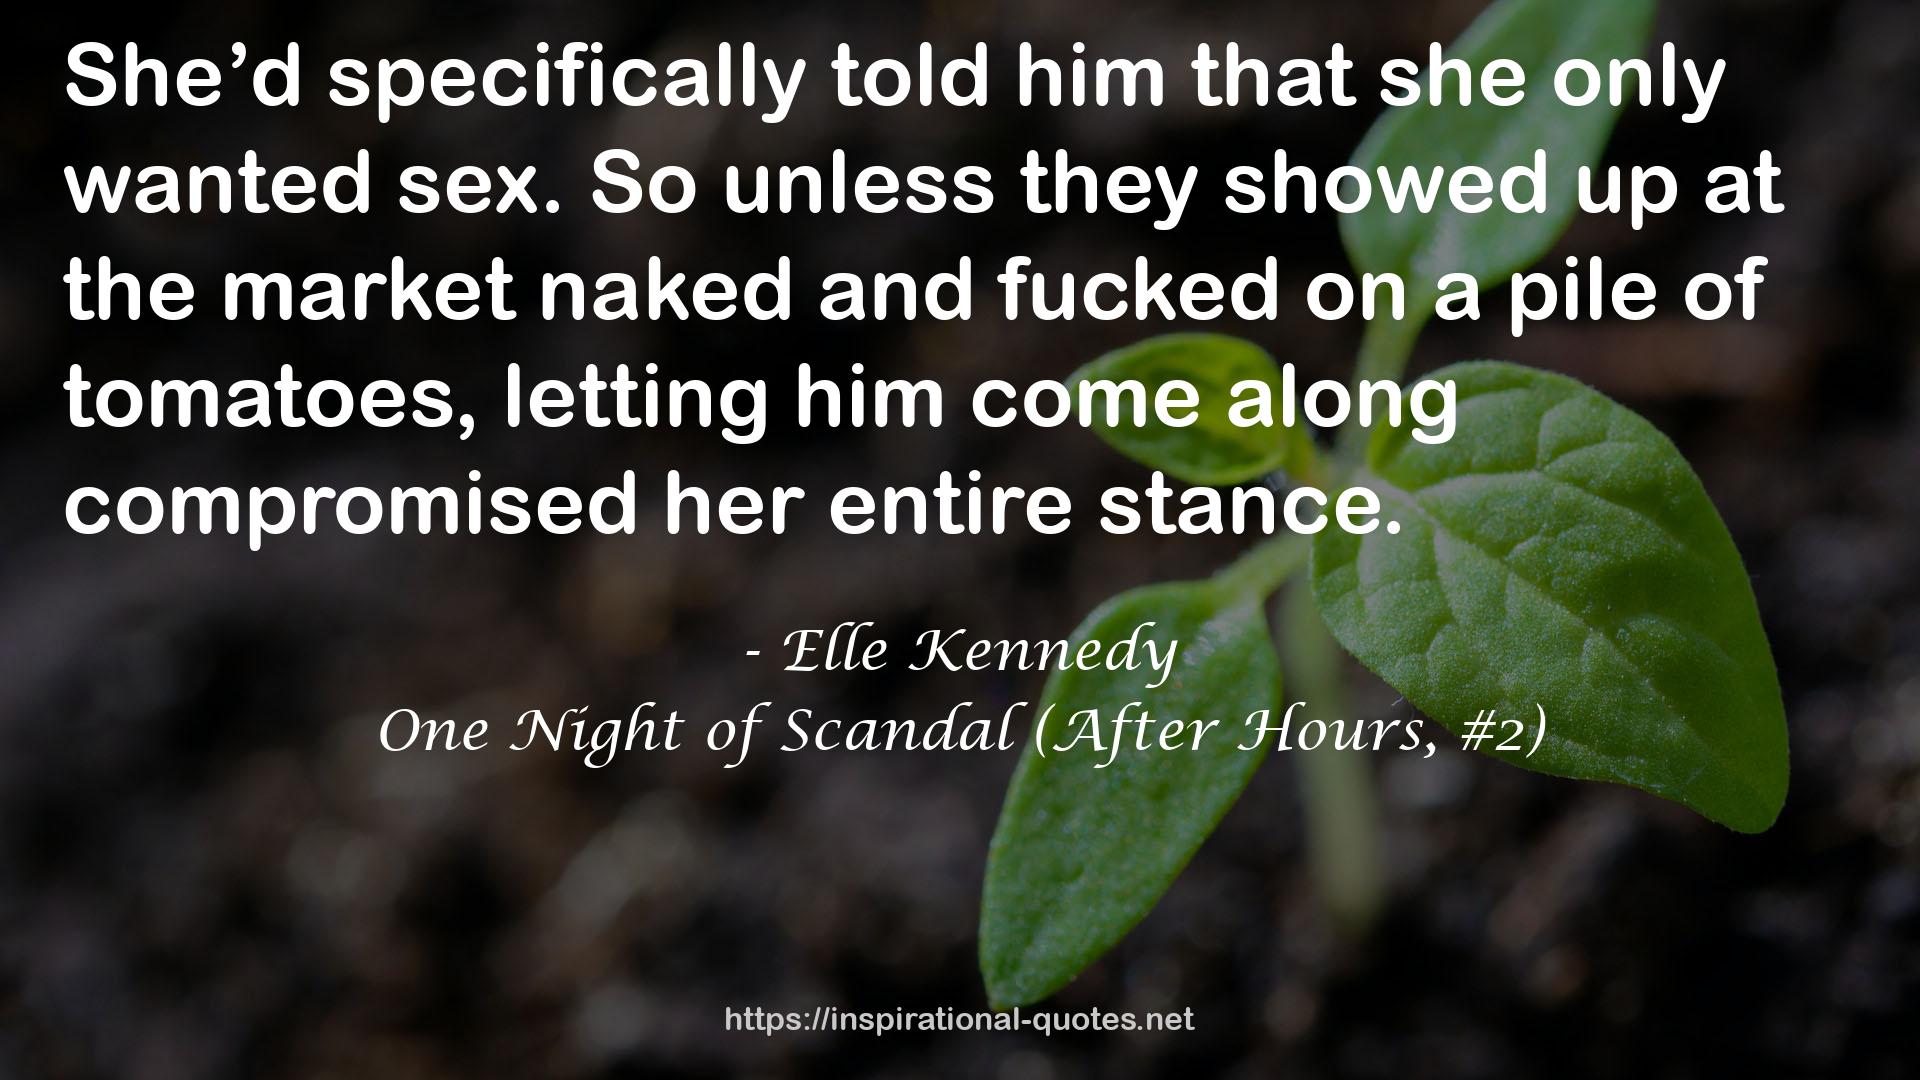 One Night of Scandal (After Hours, #2) QUOTES